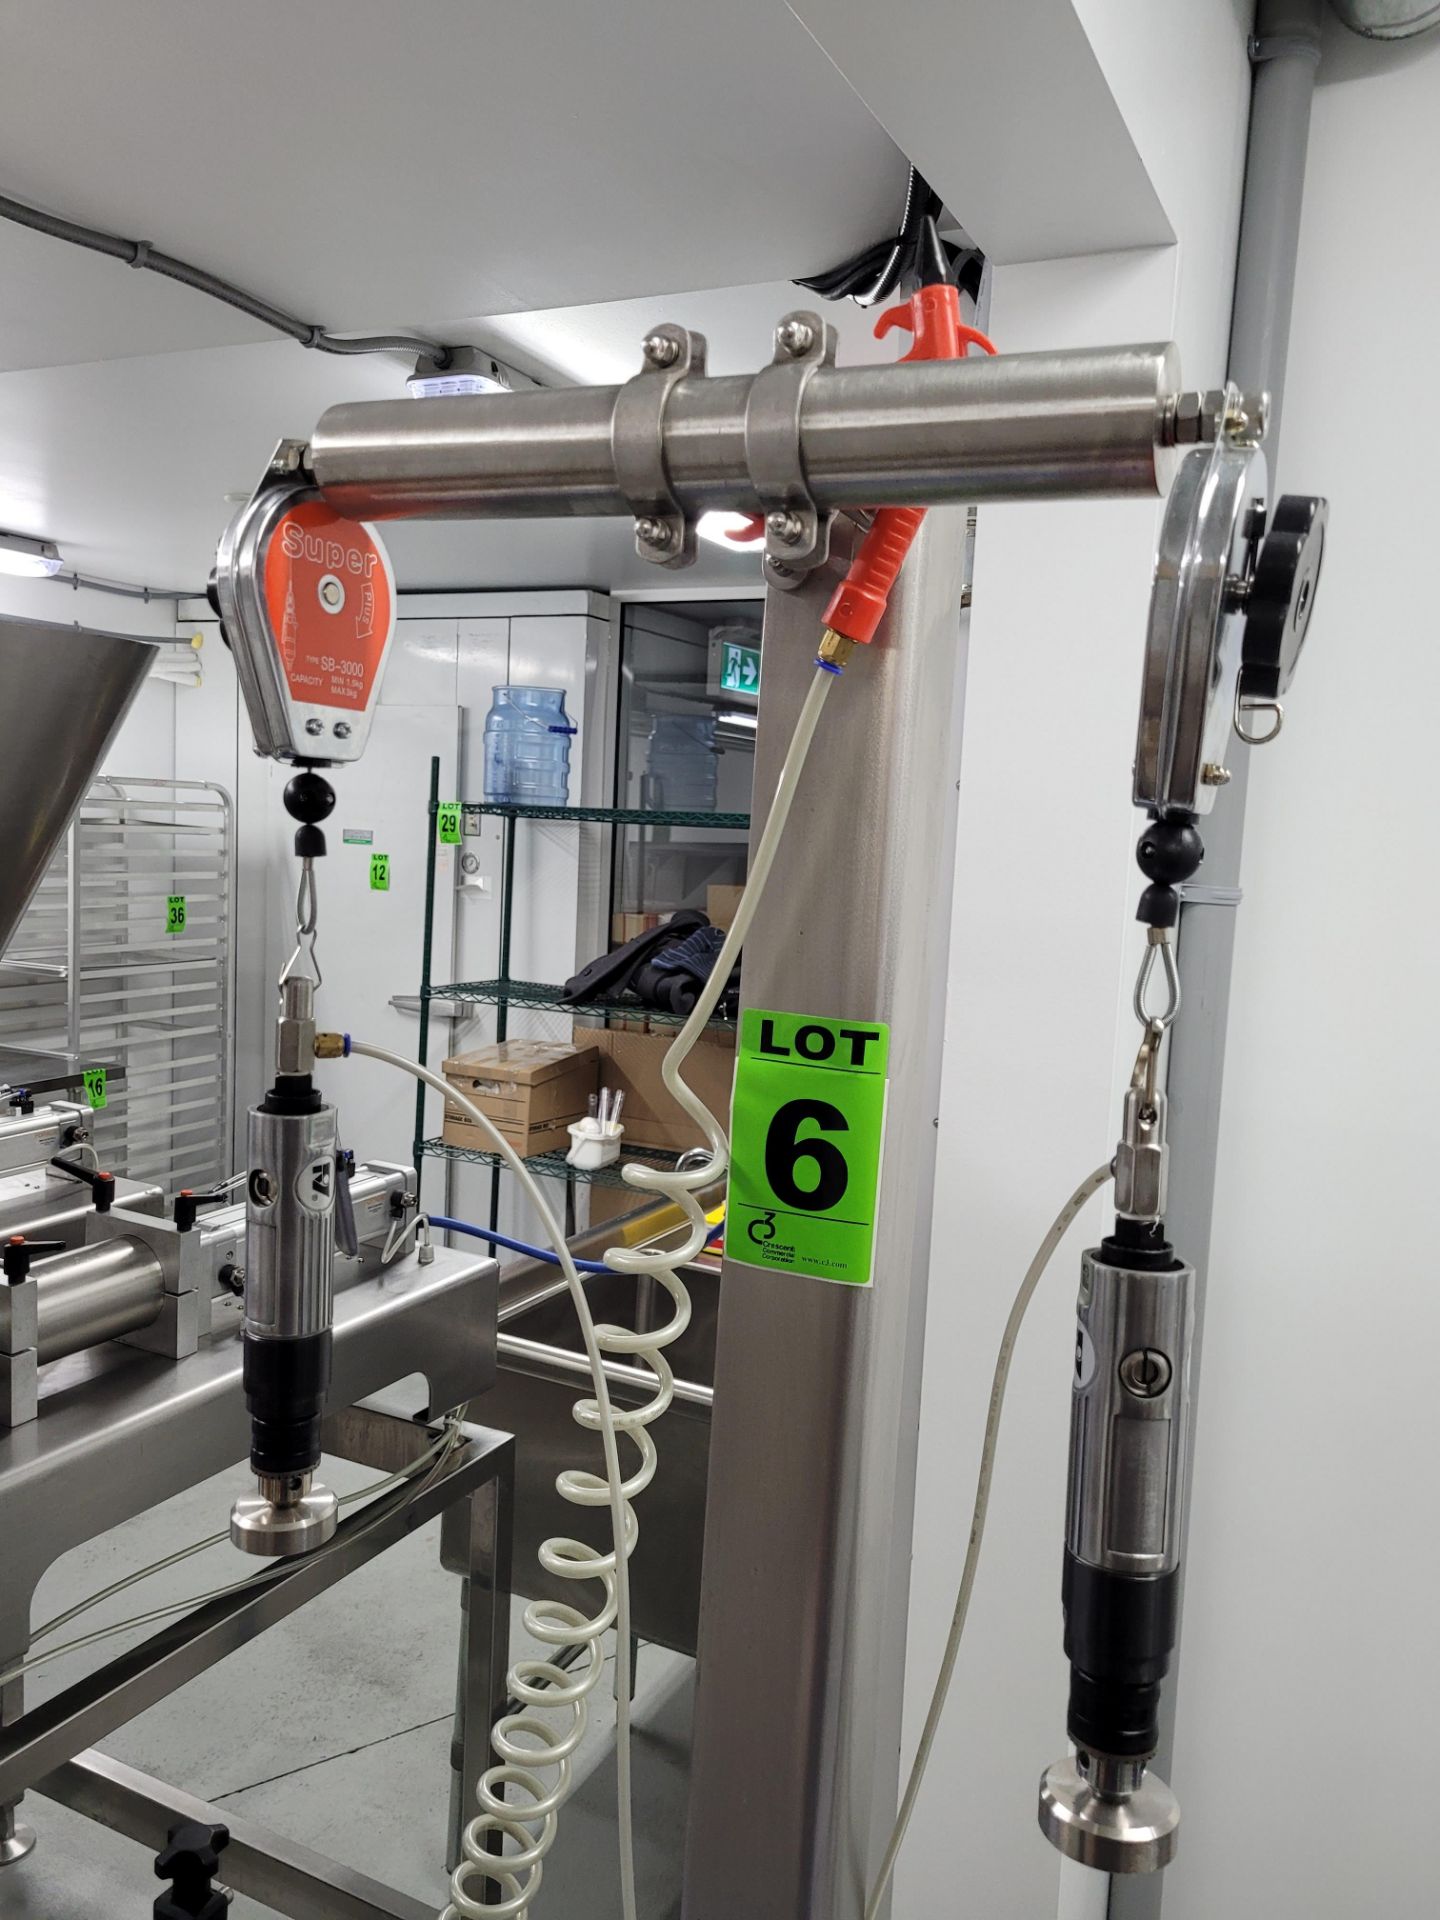 2019 ALFATEC MACHINE Double Capping Station with 2 SUPERPLUS, SB-300 Unwinders and 2 Pneumatic T